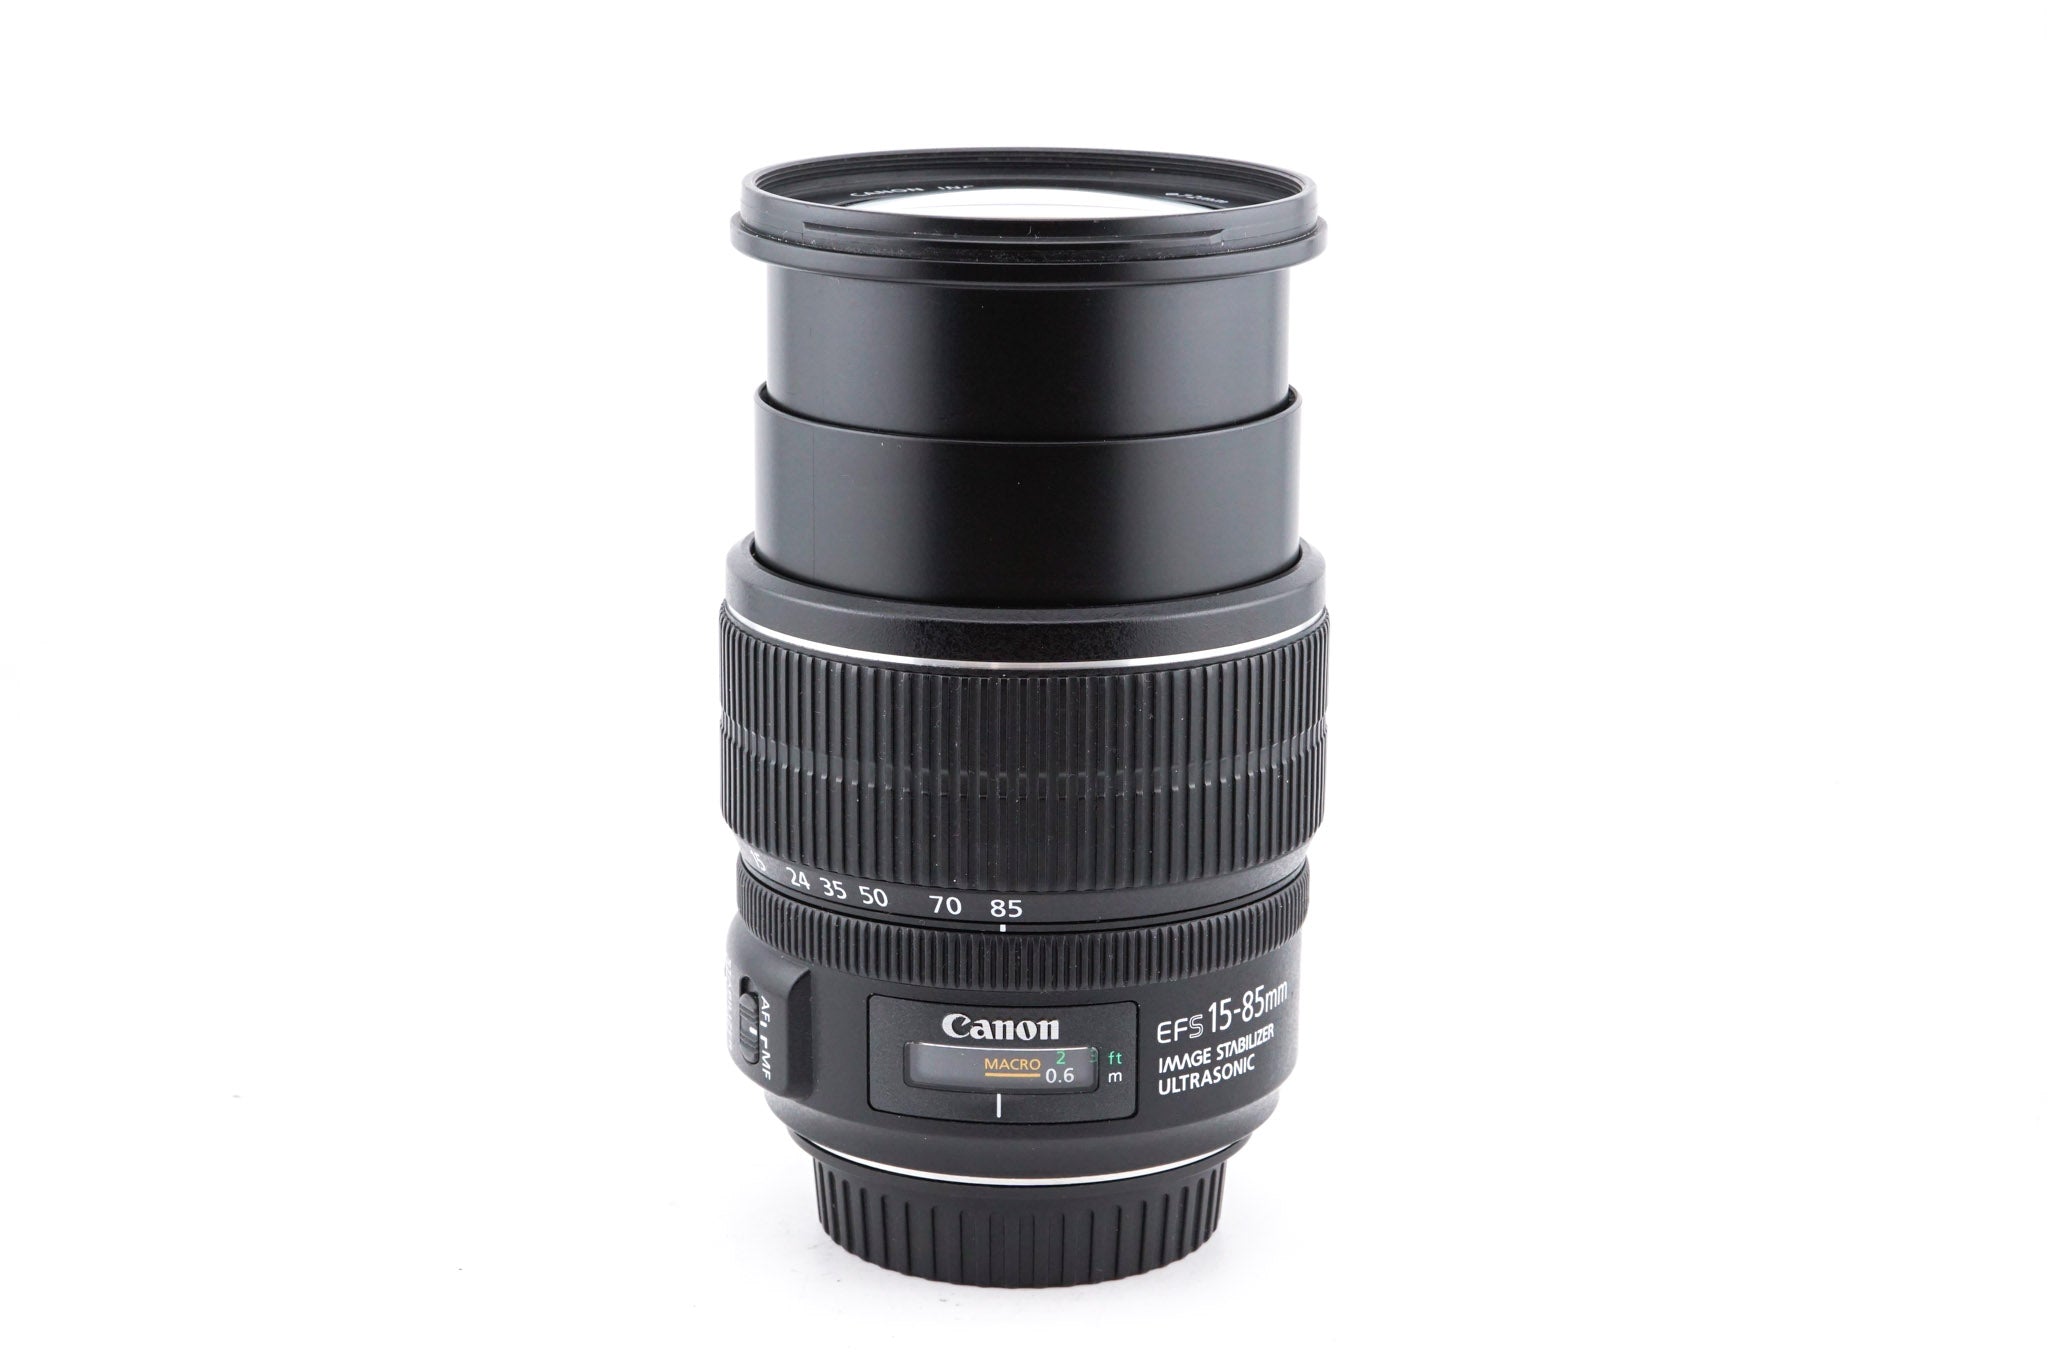 Canon 15-85mm f3.5-5.6 IS USM